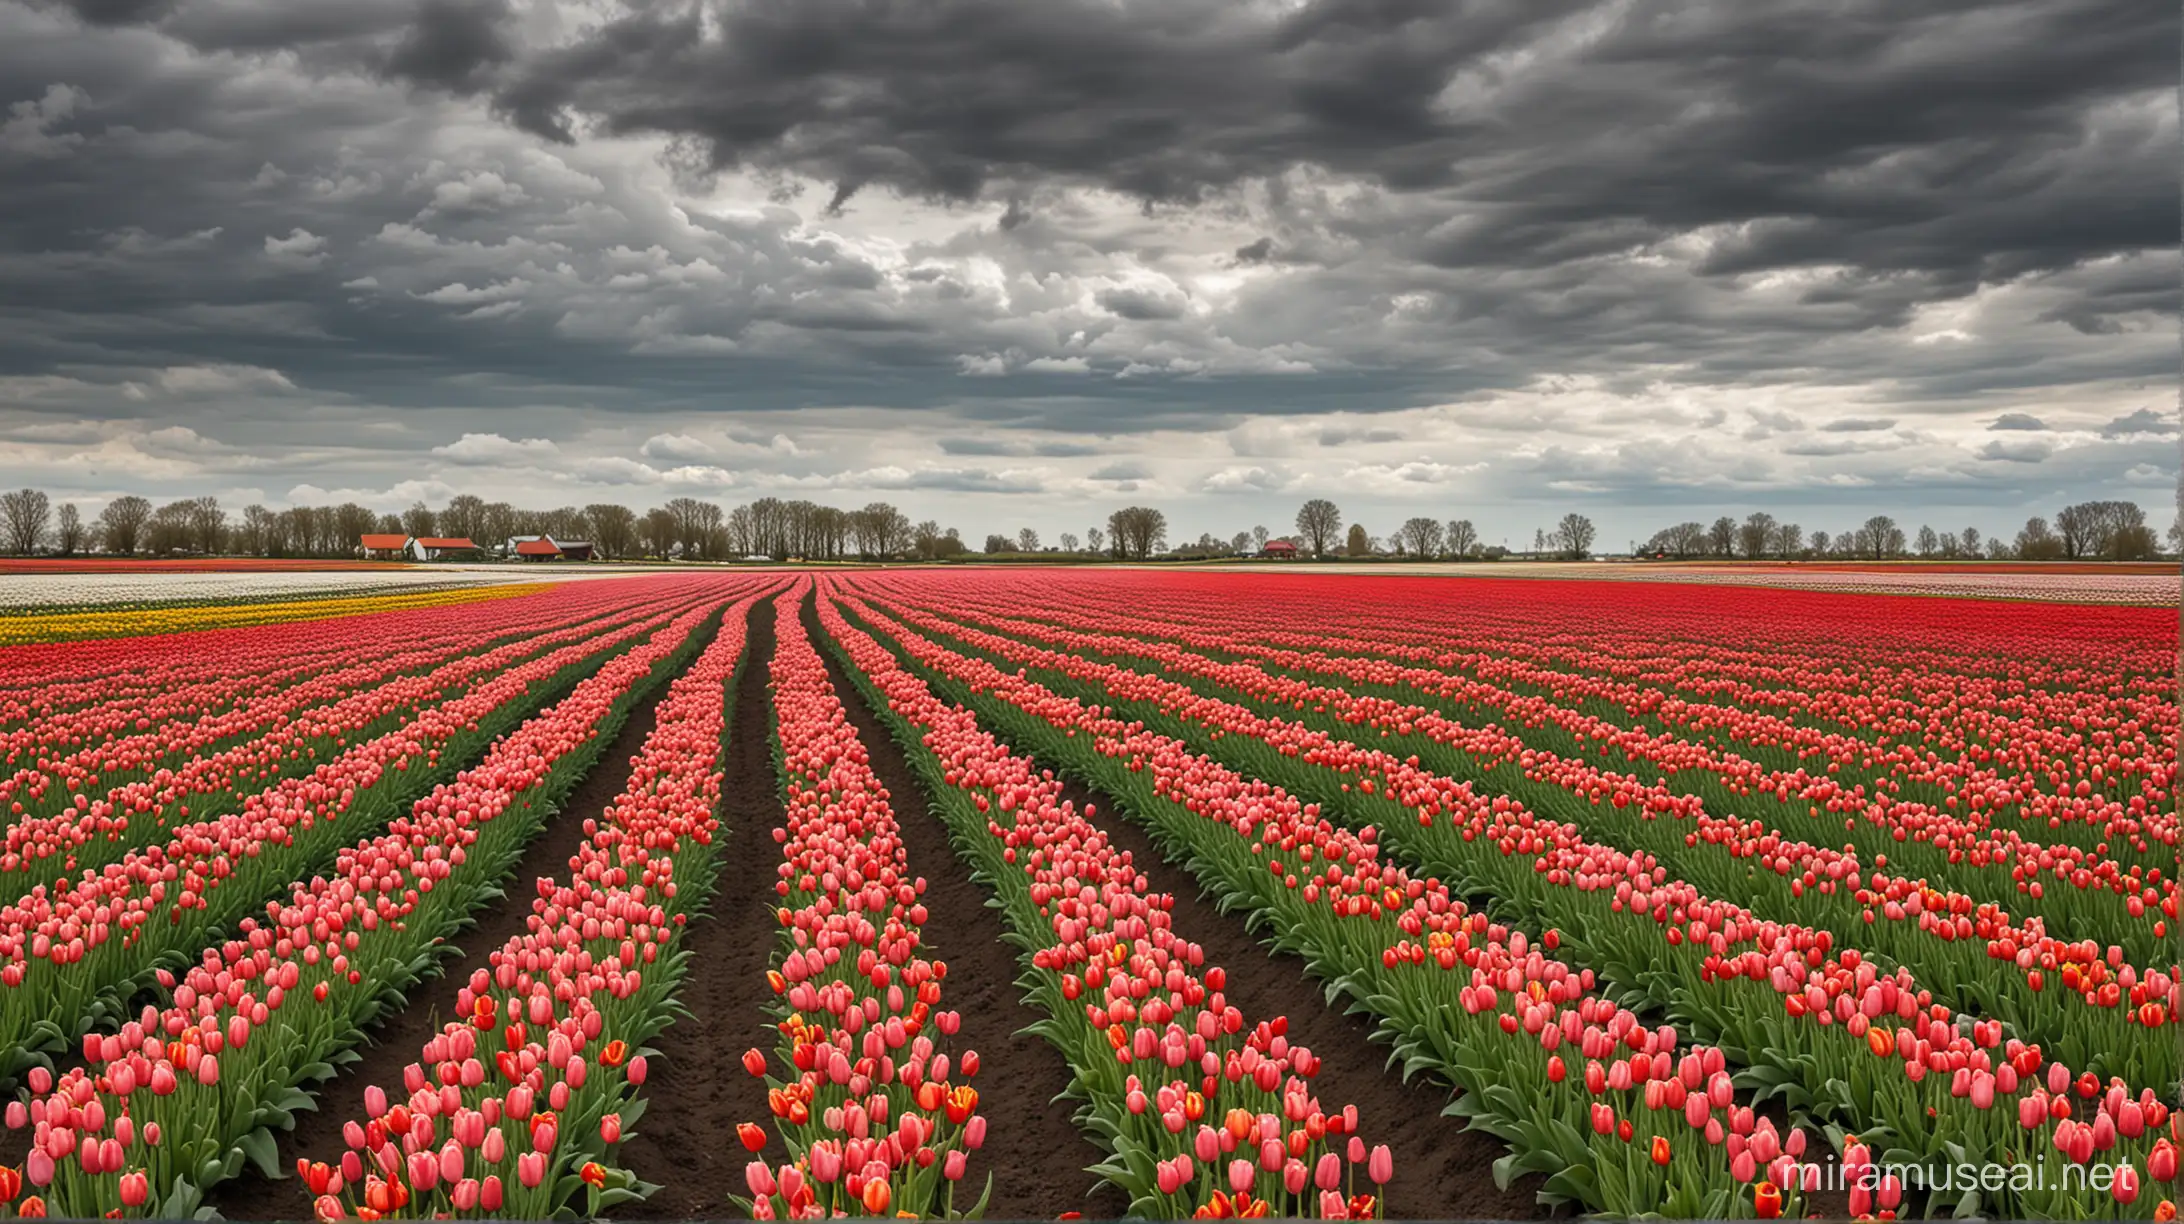 Vibrant Field of Tulips under a Majestic Cloudy Sky